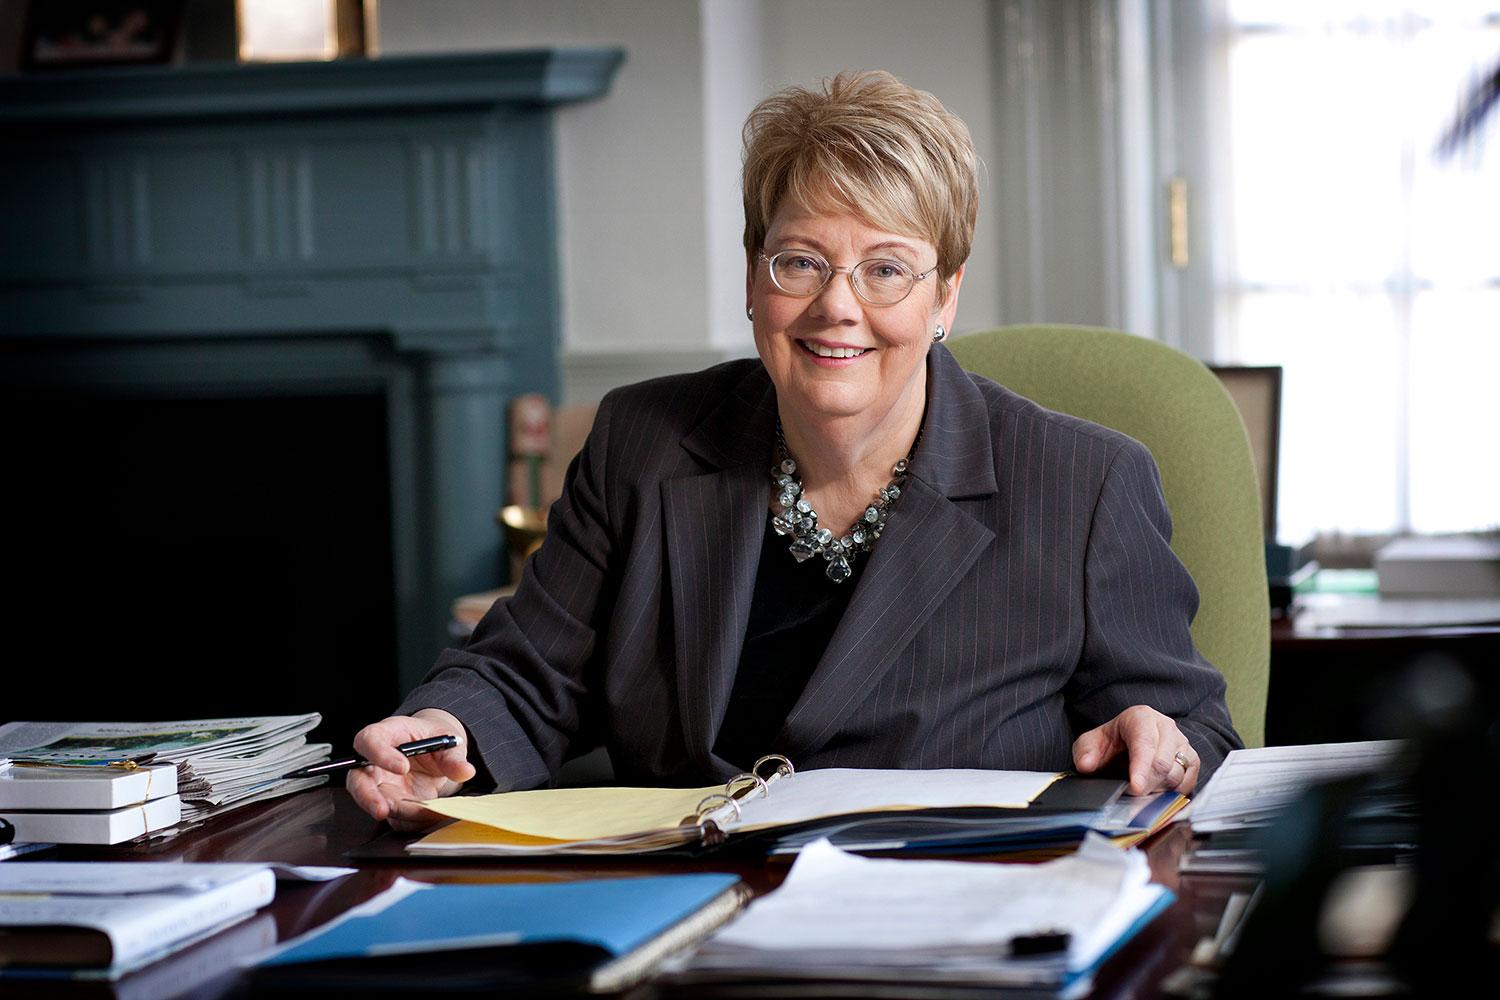 President Teresa A. Sullivan working at her desk smiling at the camera